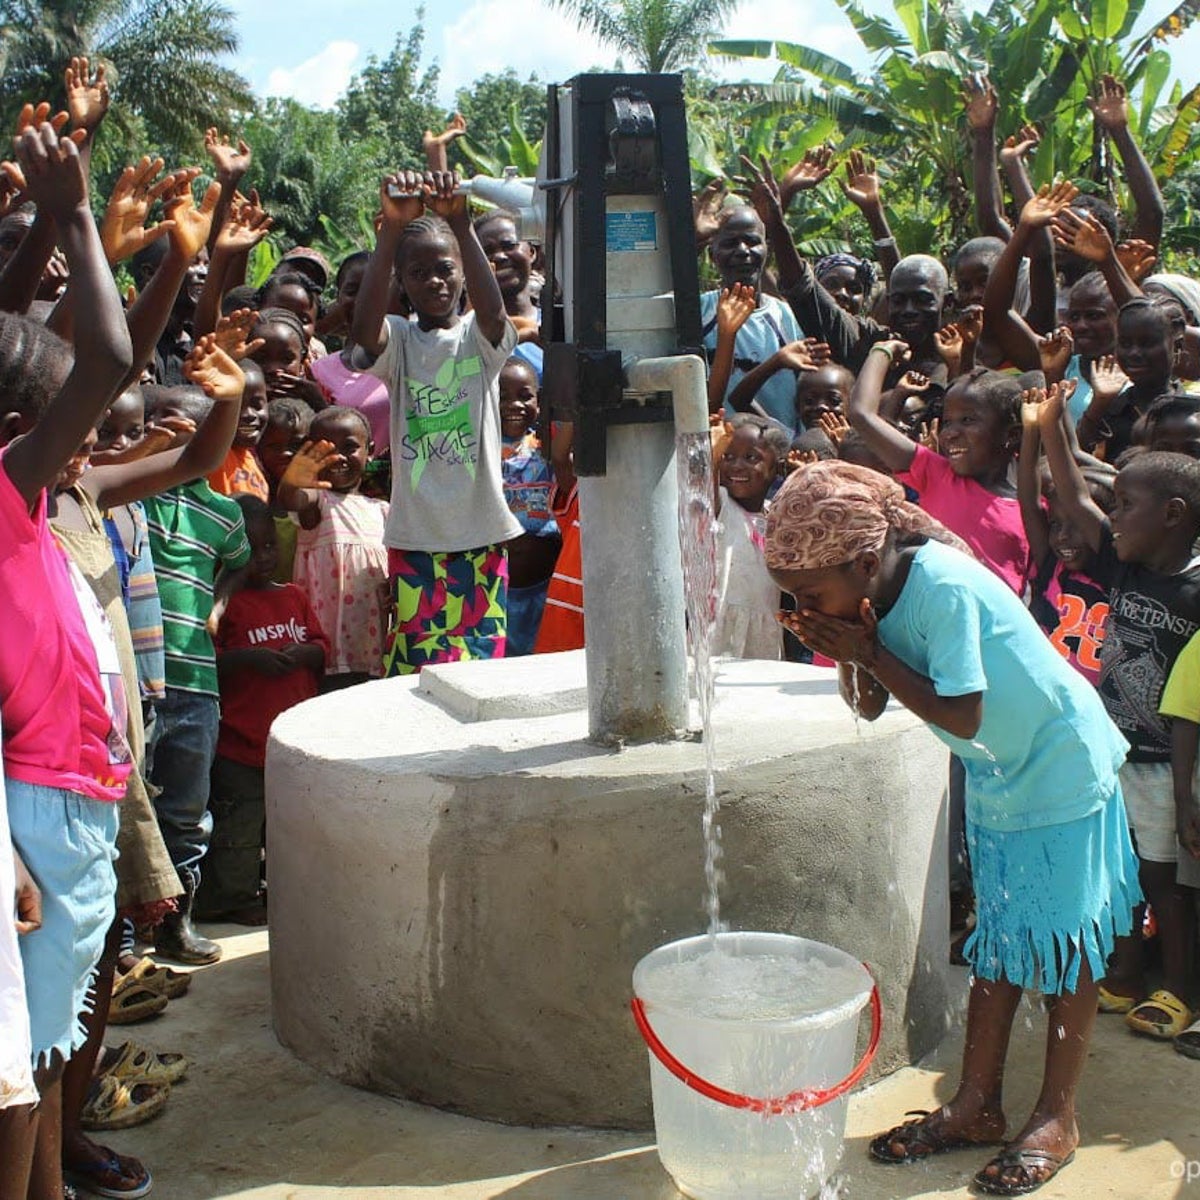 A young Liberian girl drinks deep from one of the new wells OBI built in her area.